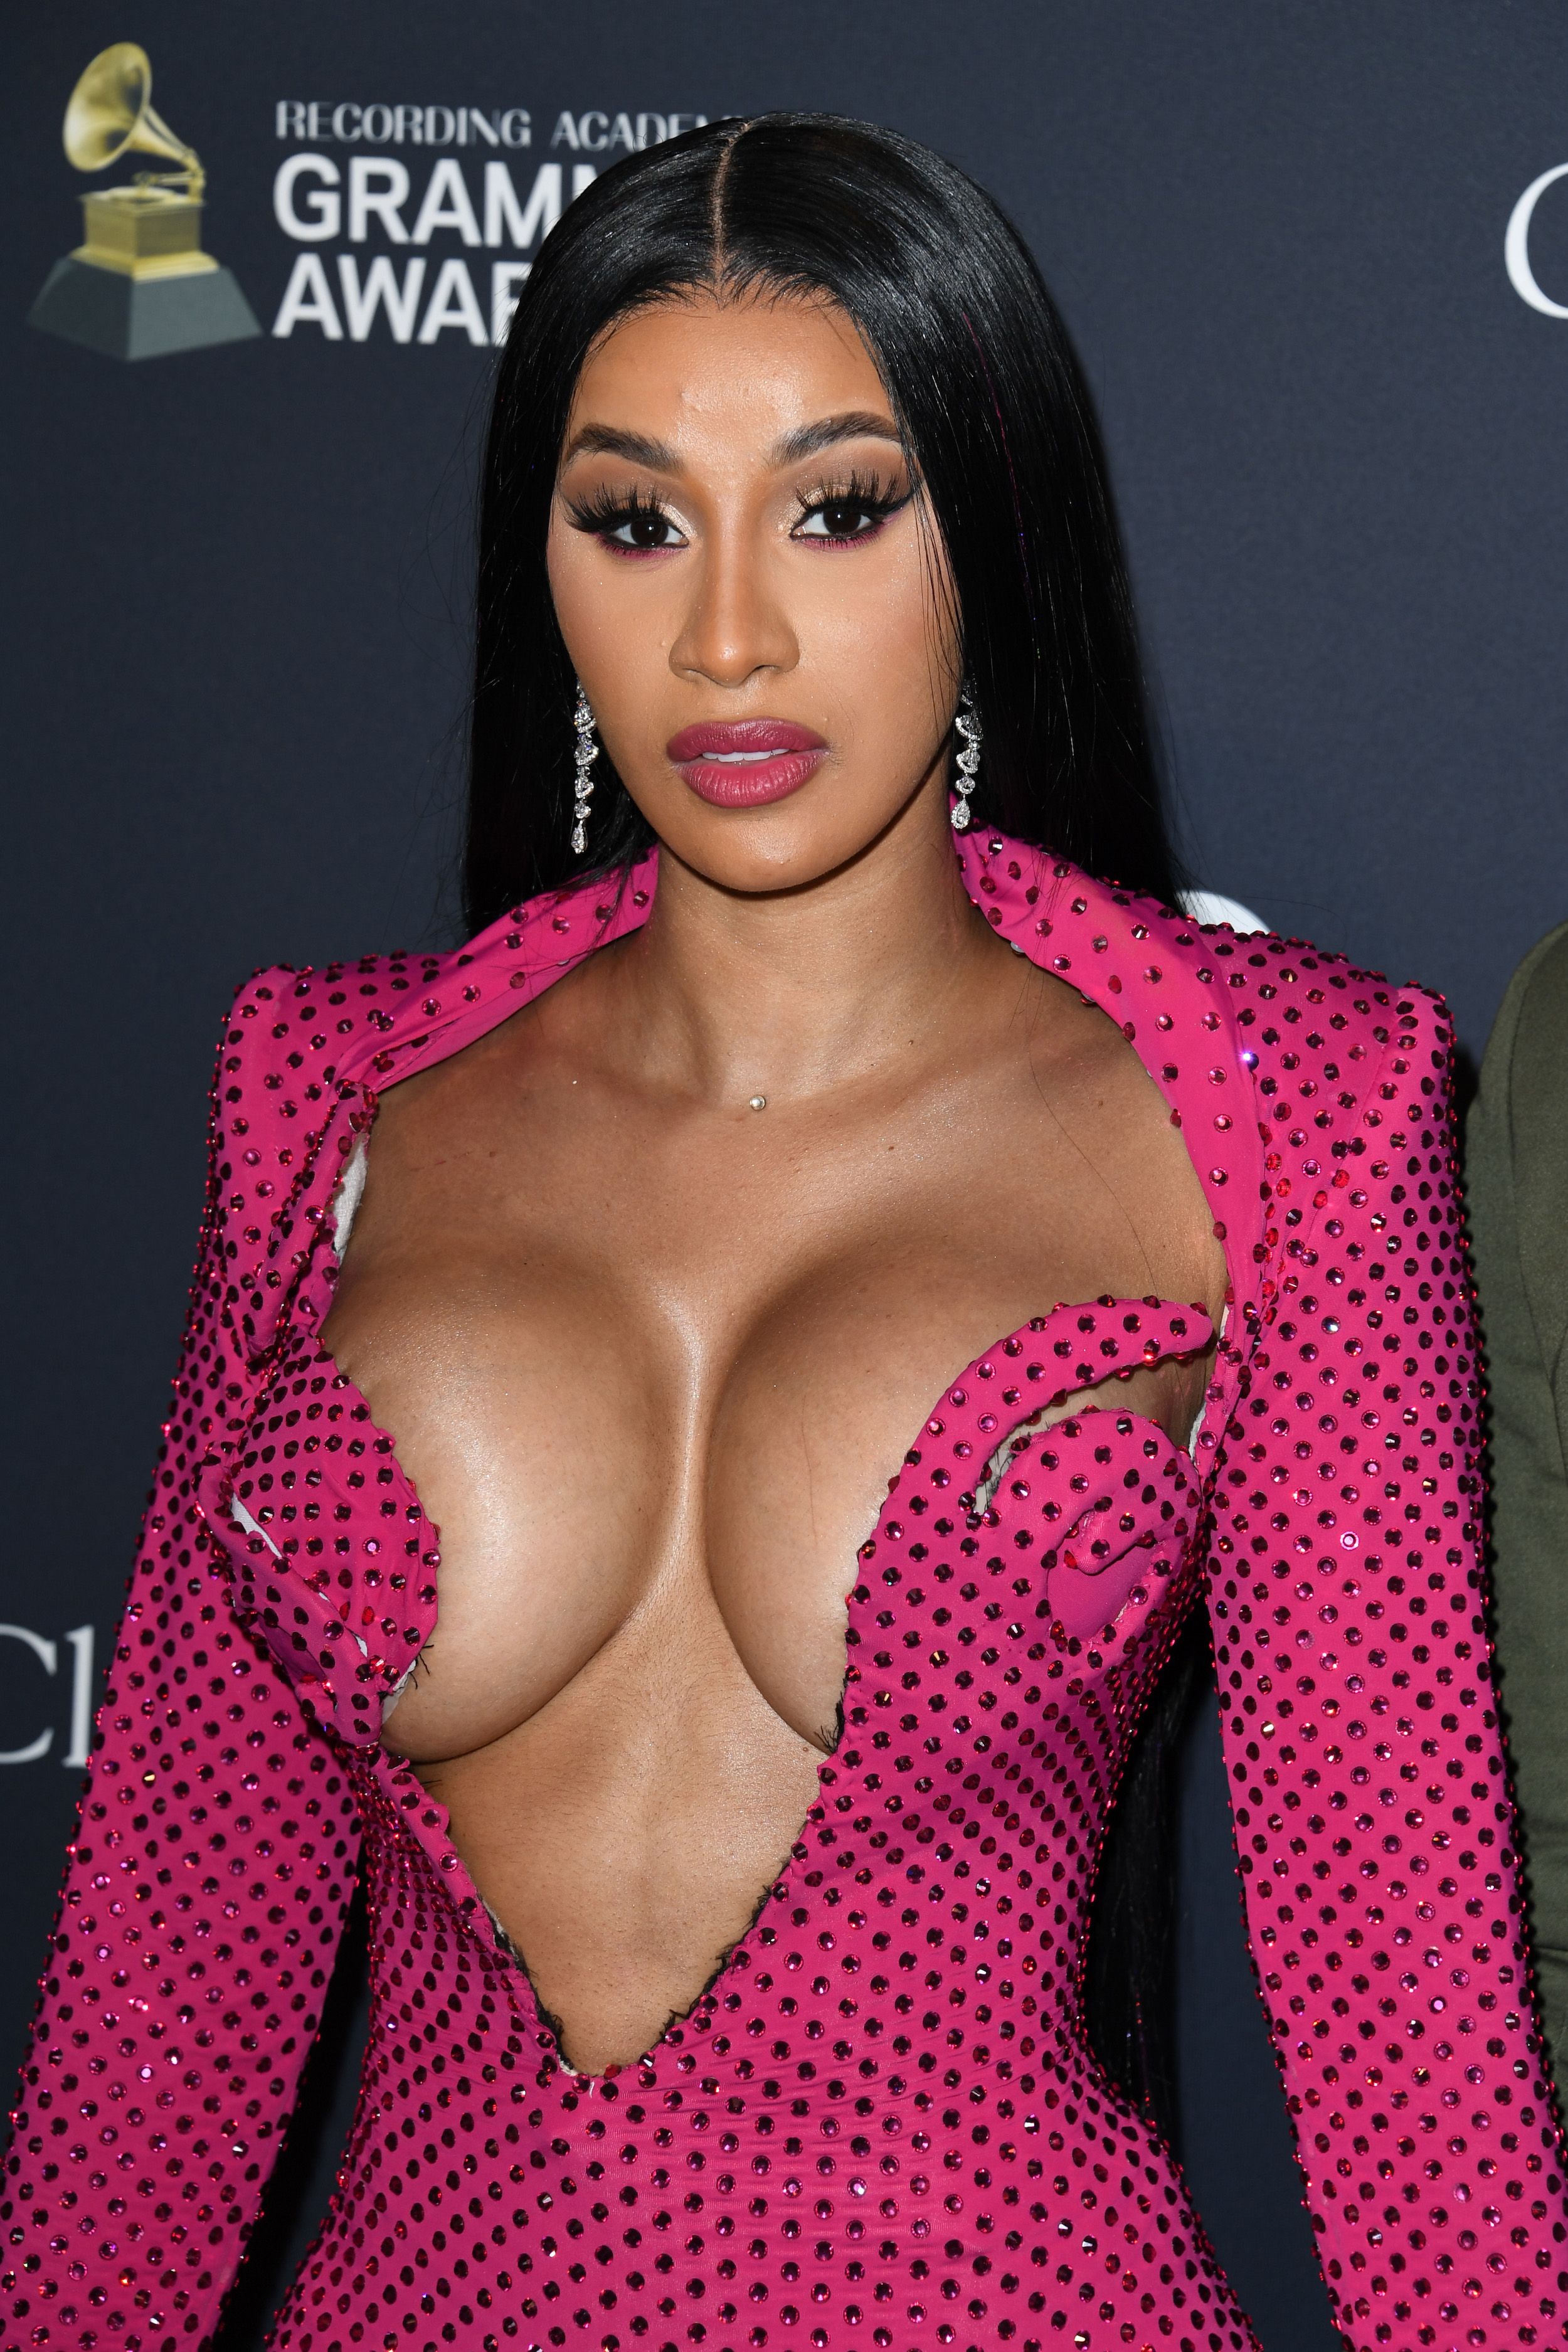 Photos Of Cardi Bs Target Shopping Experience Go Viral As Star Shuts